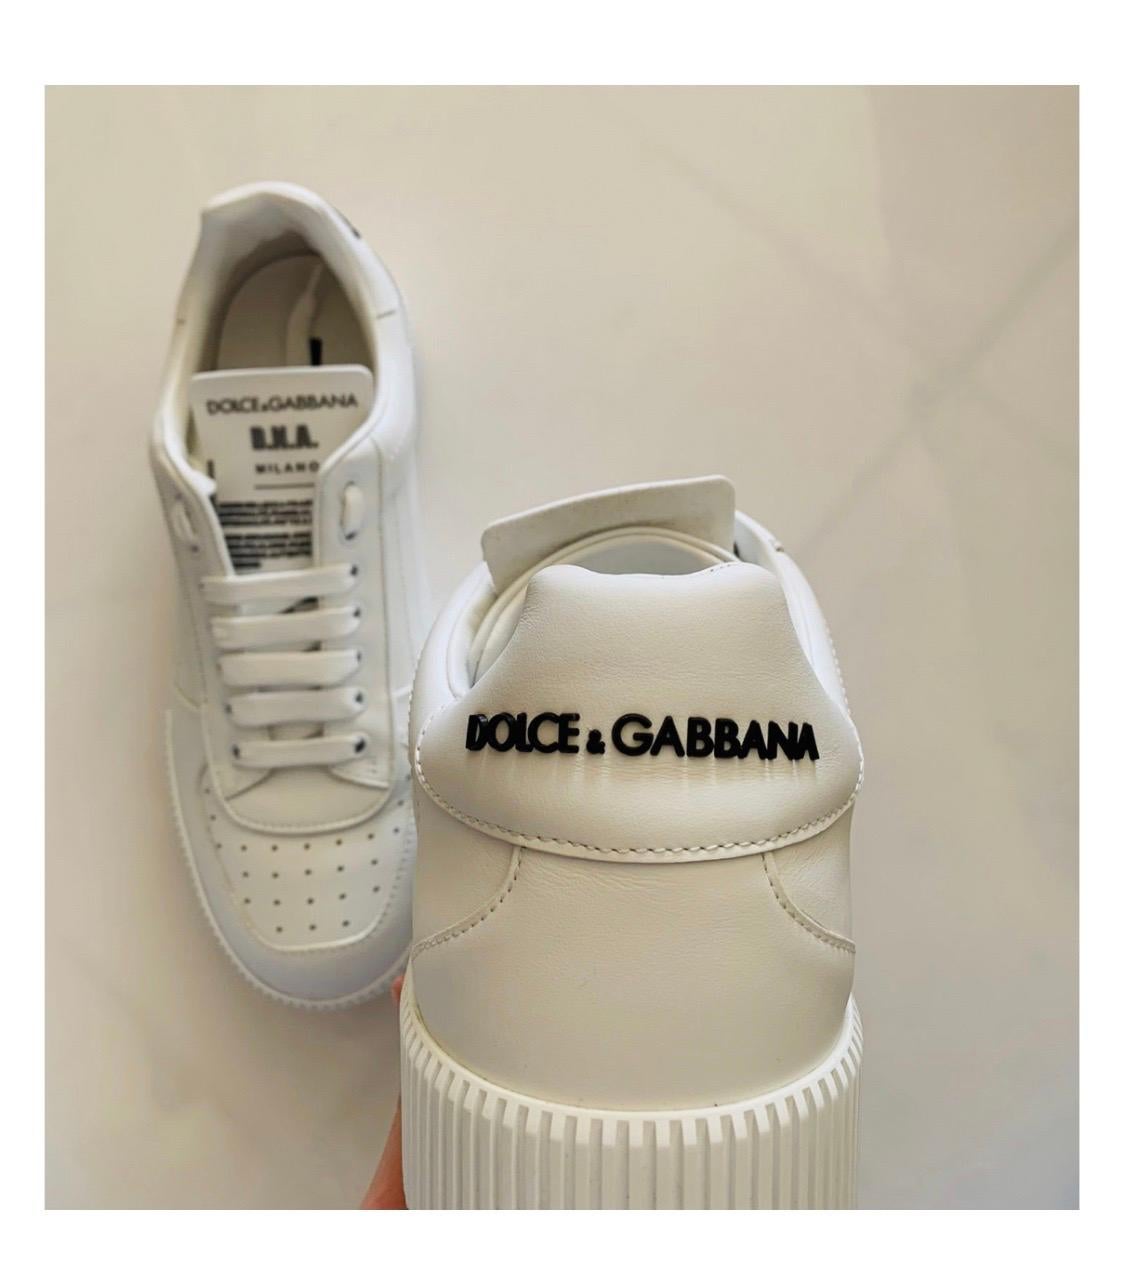 White Dolce & Gabbana DNA men white leather calfskin trainers sneakers 